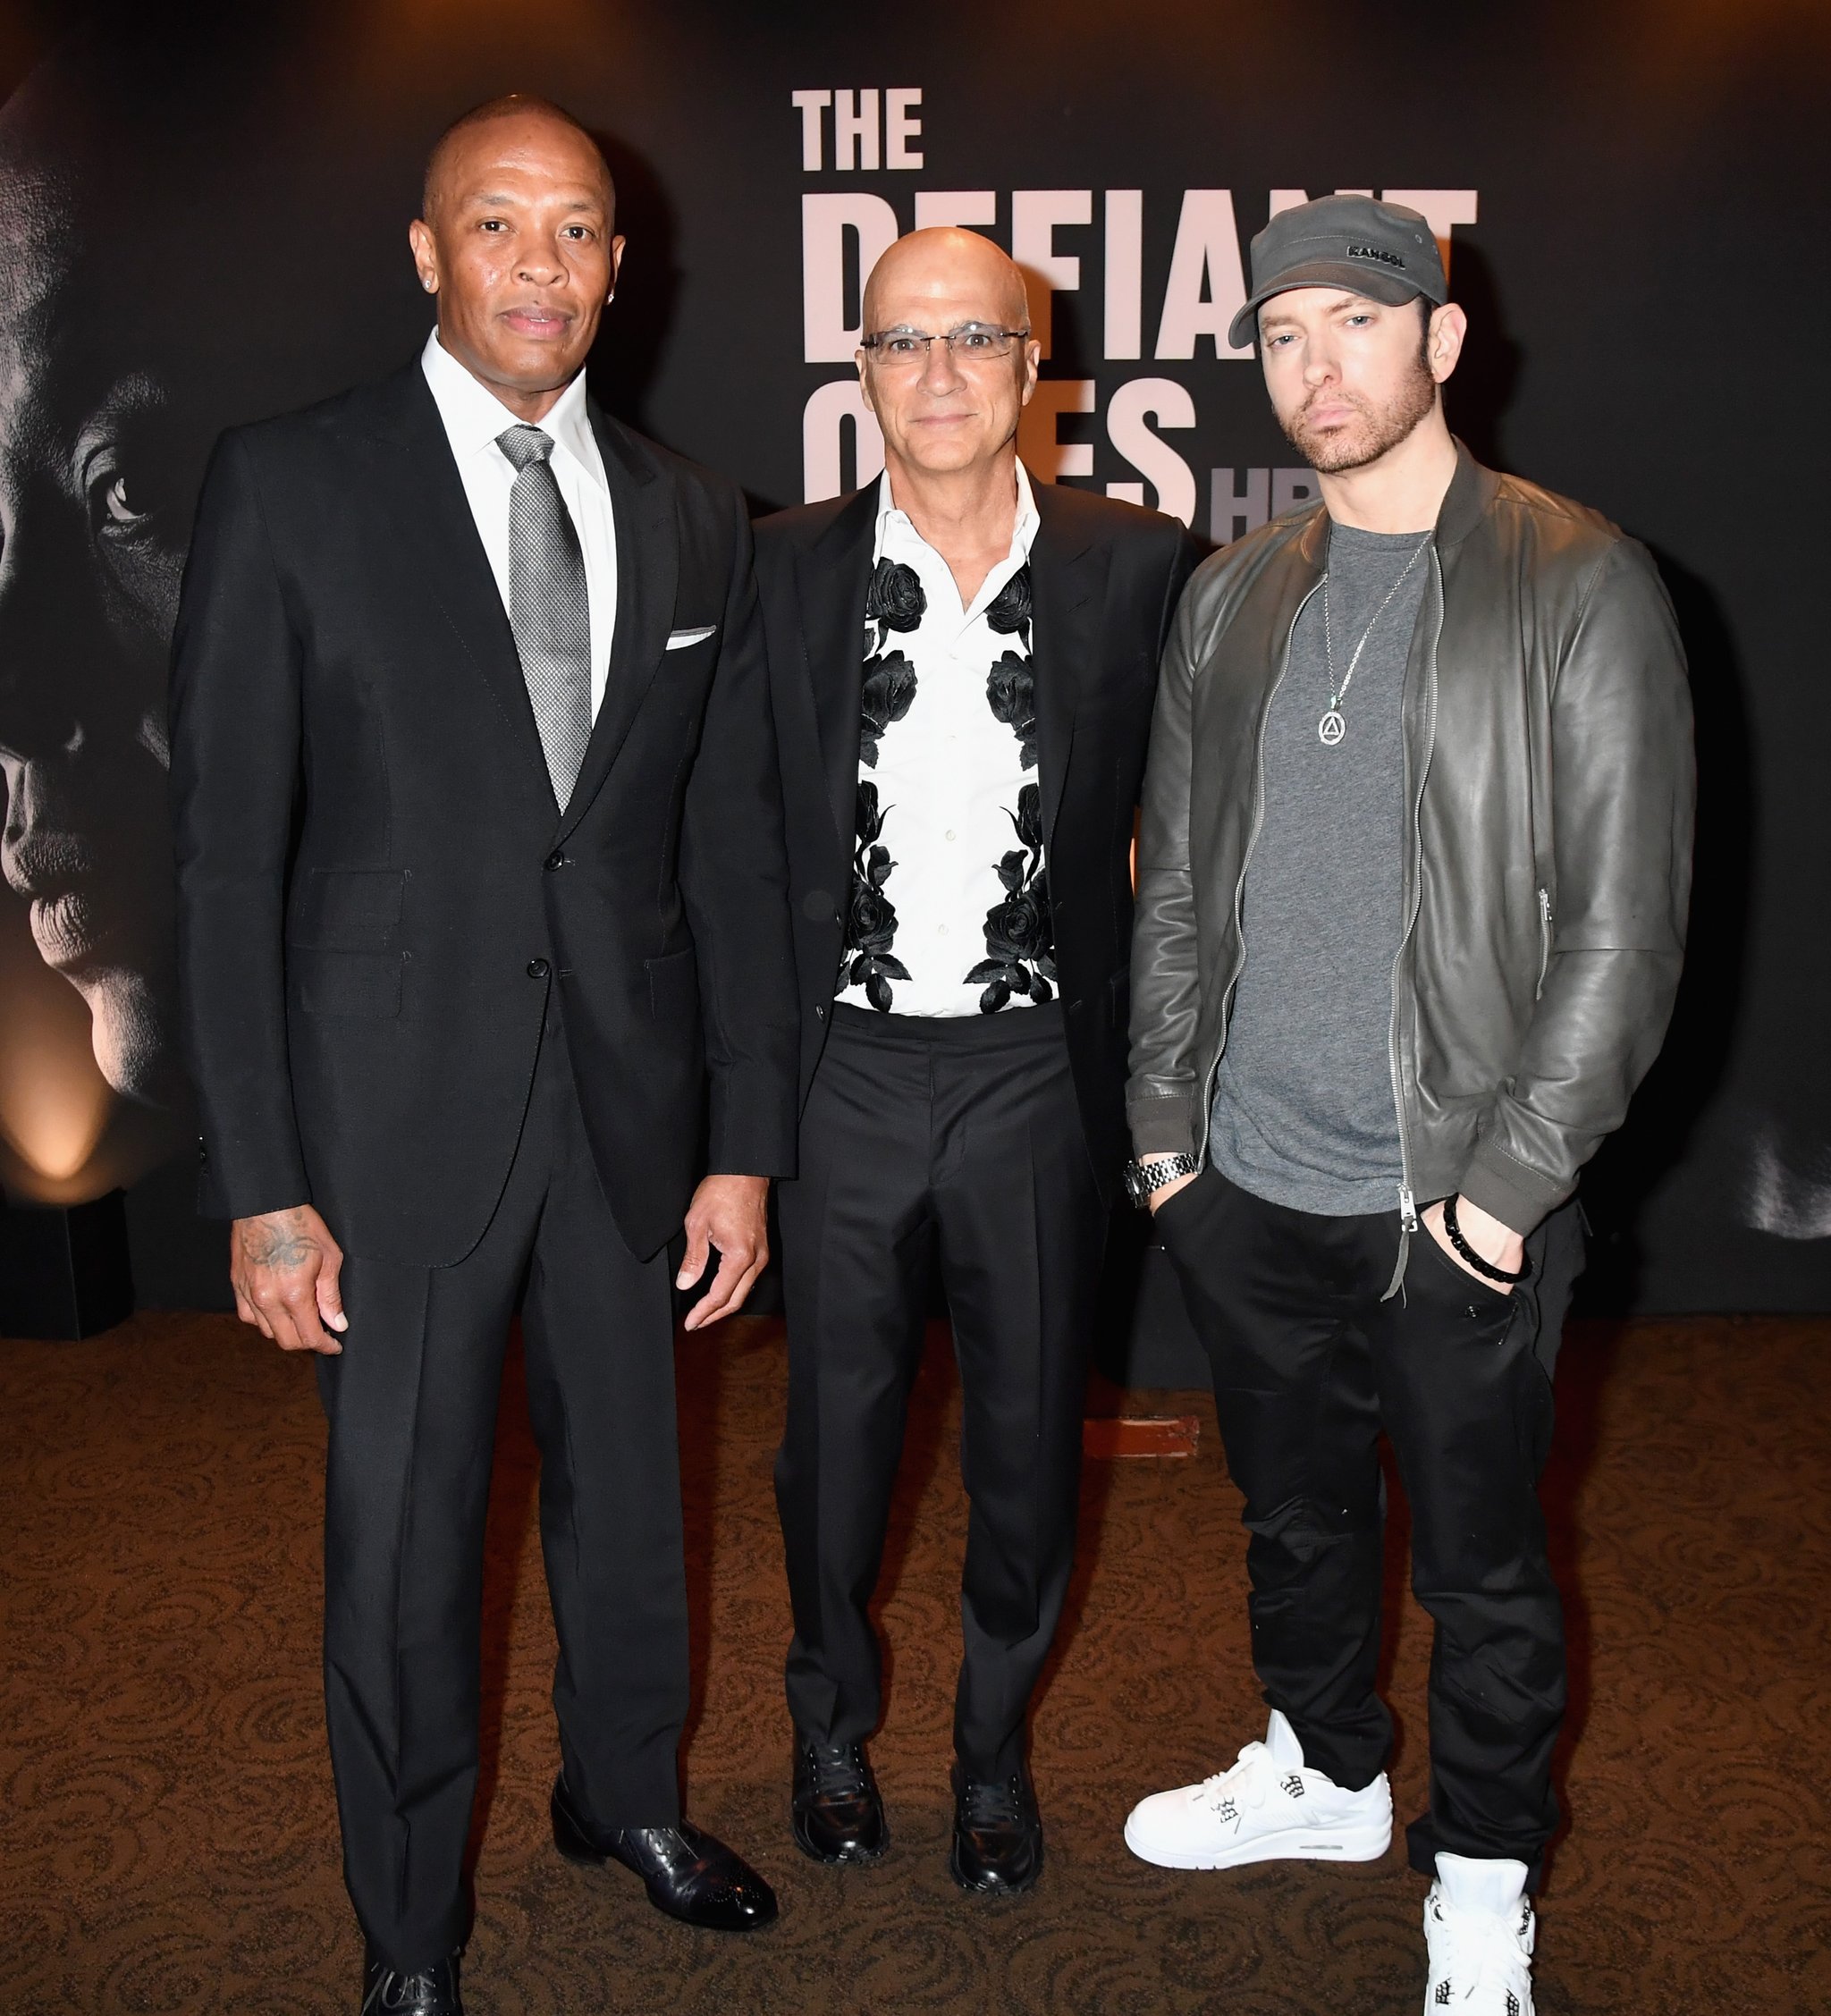 Eminem Appears With Unwanted Hair On His Face And I Don't Know If It's A Beard